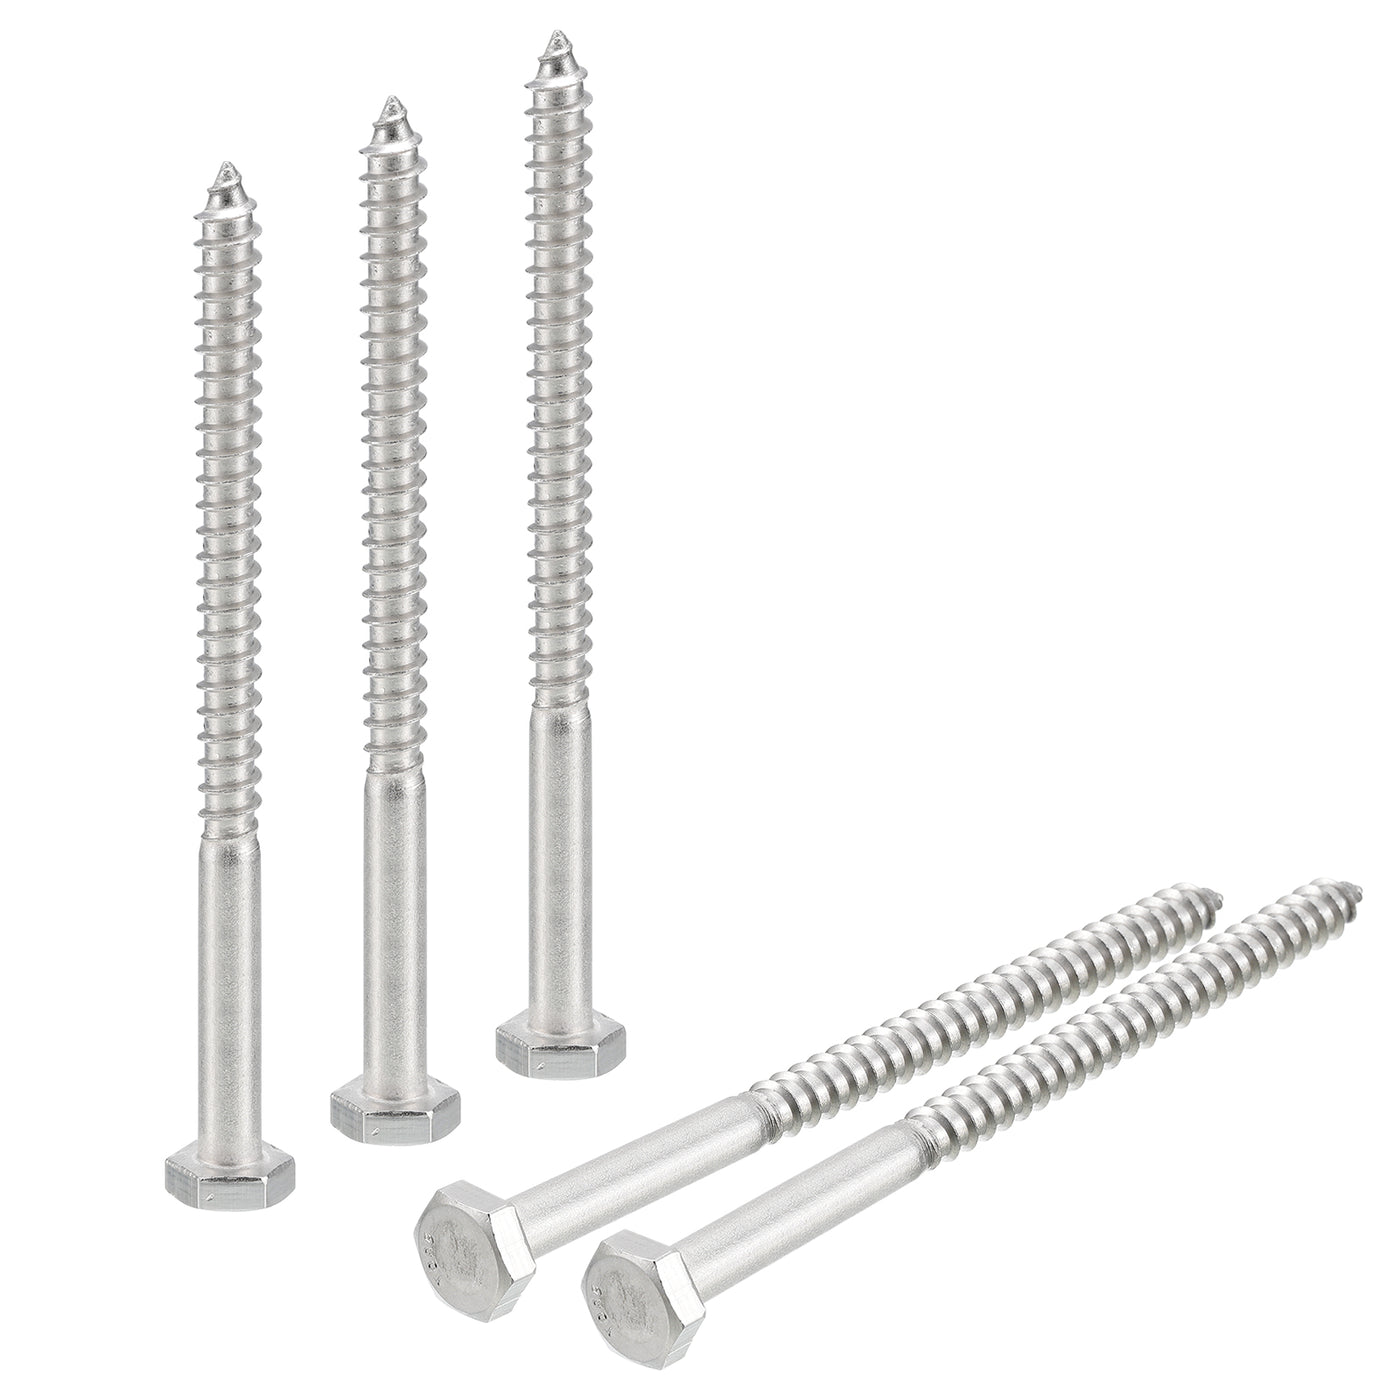 uxcell Uxcell Hex Head Lag Screws Bolts, 10pcs 1/4" x 3-1/2" 304 Stainless Steel Wood Screws